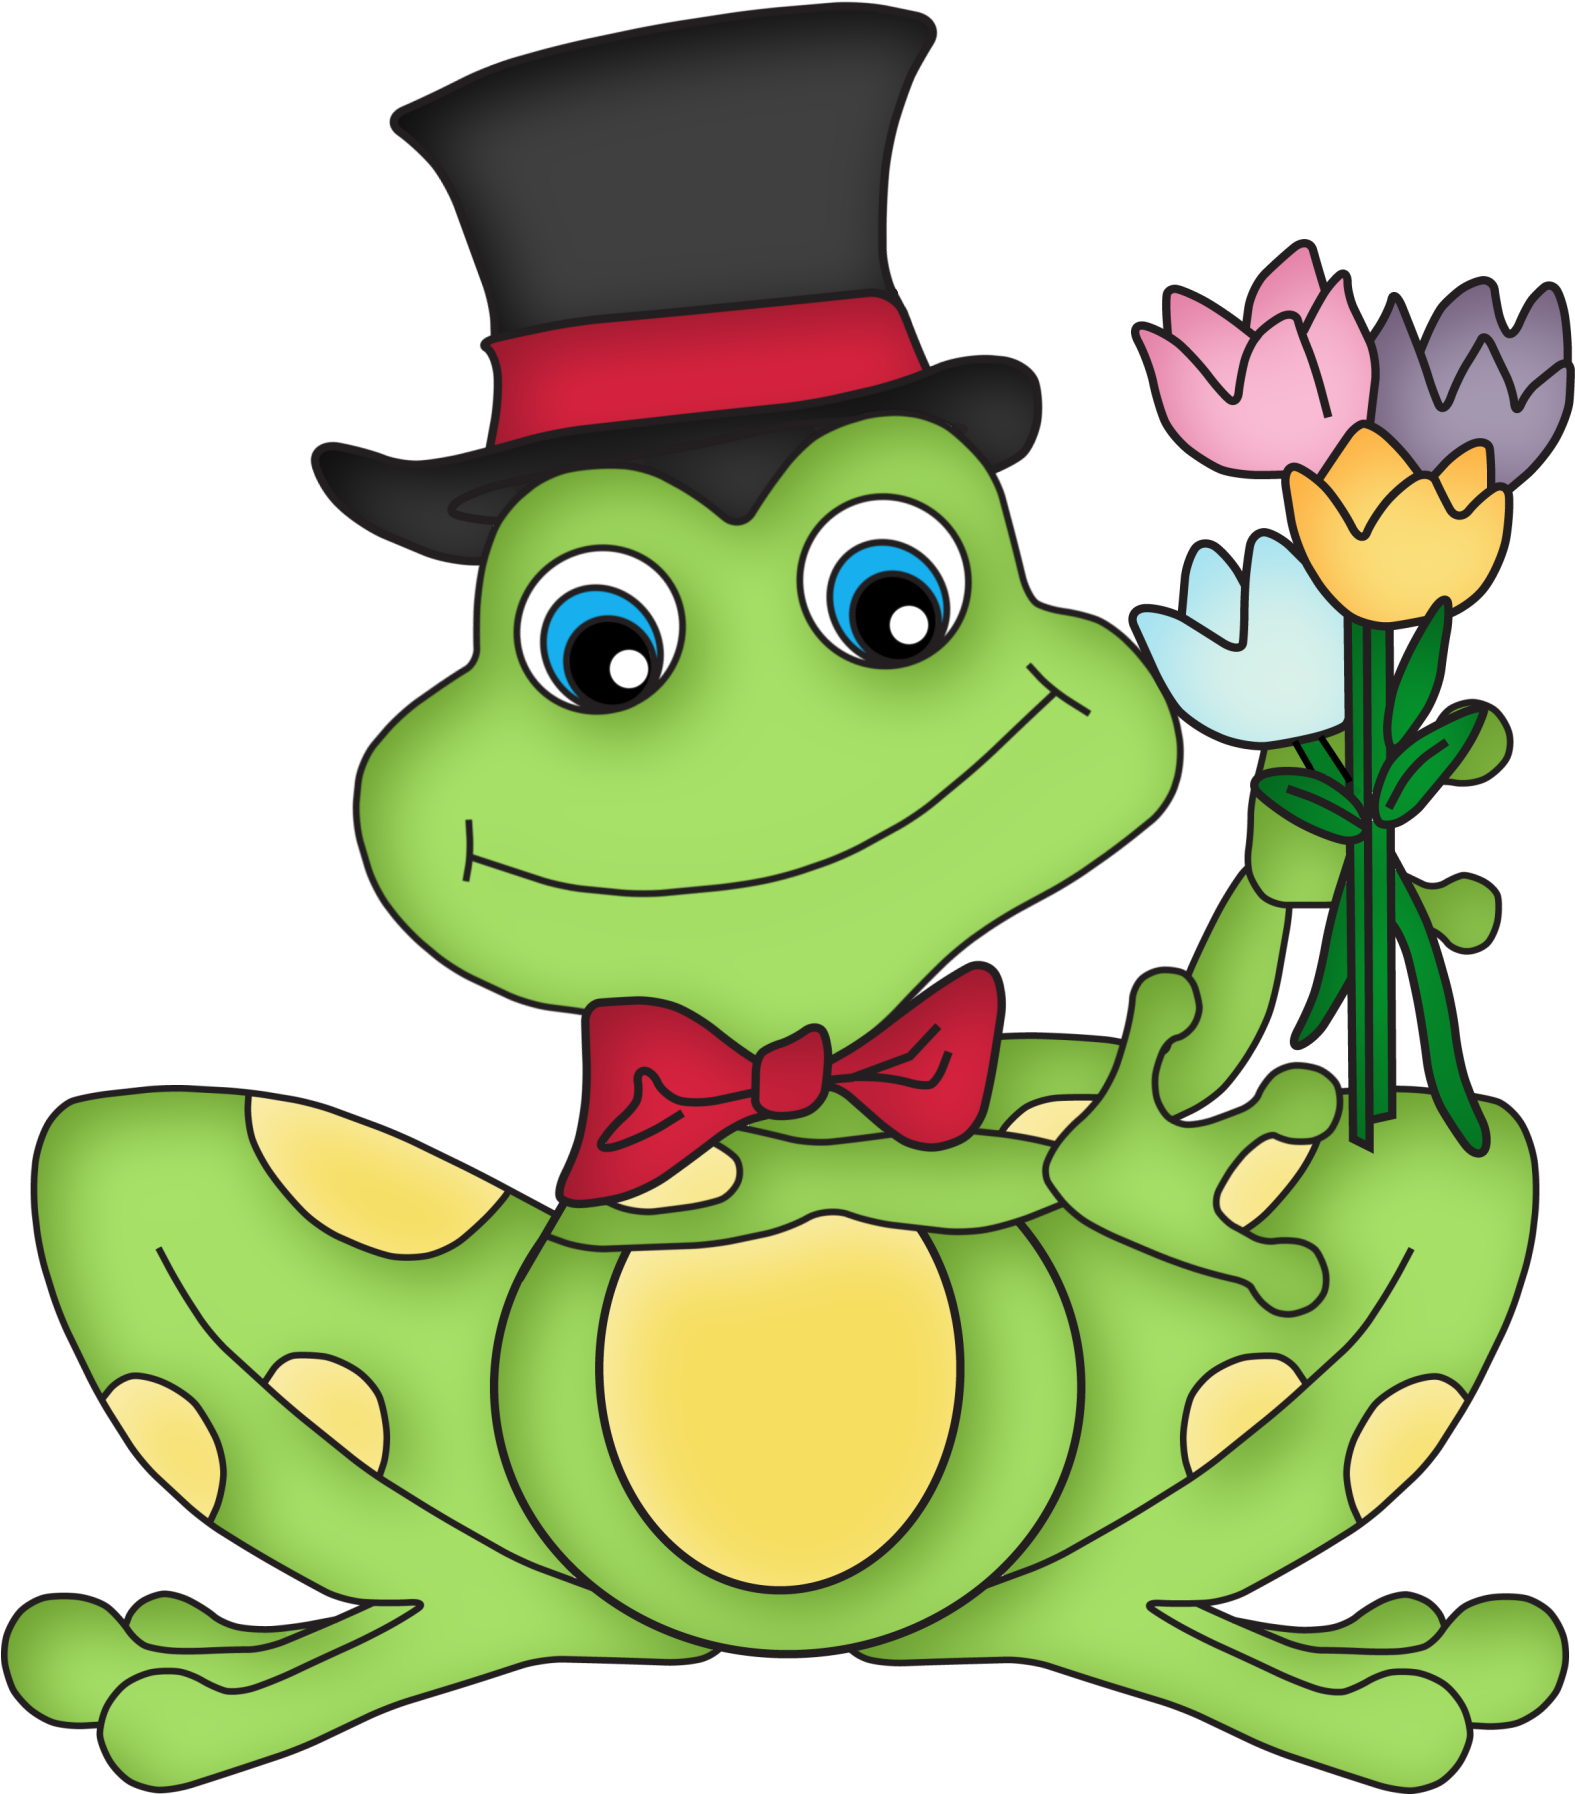 Frog W/a Top Hat & Flowers Frog And Toad, Window Art, - Frog (1700x1938)